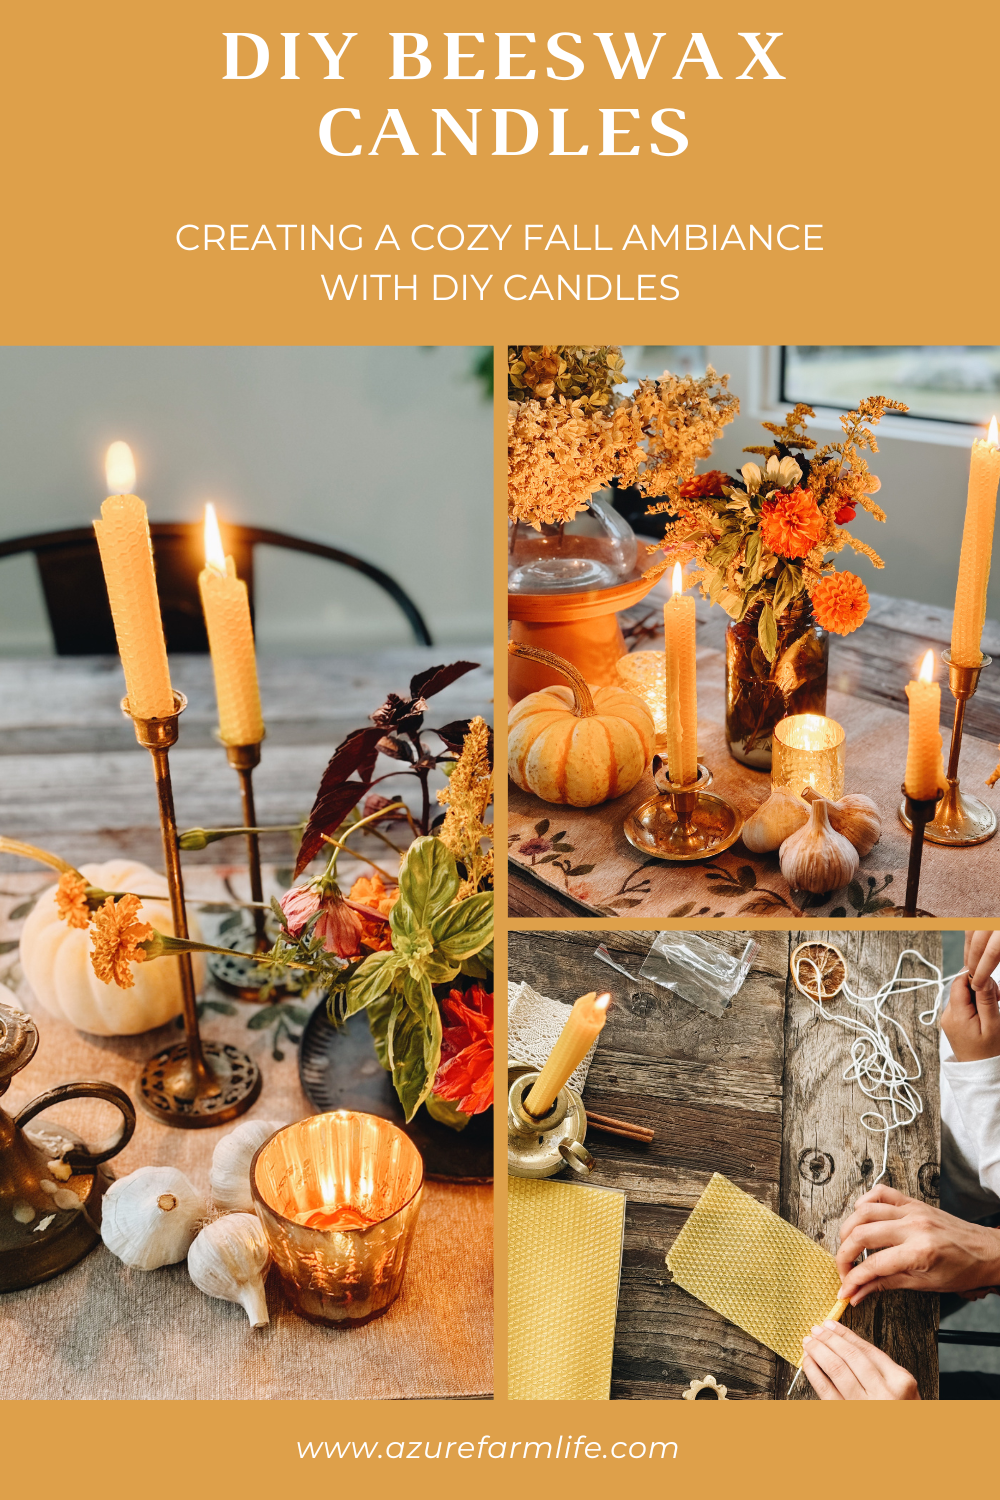 Create A Cozy Fall Ambiance By Making Your Own Beeswax Candles